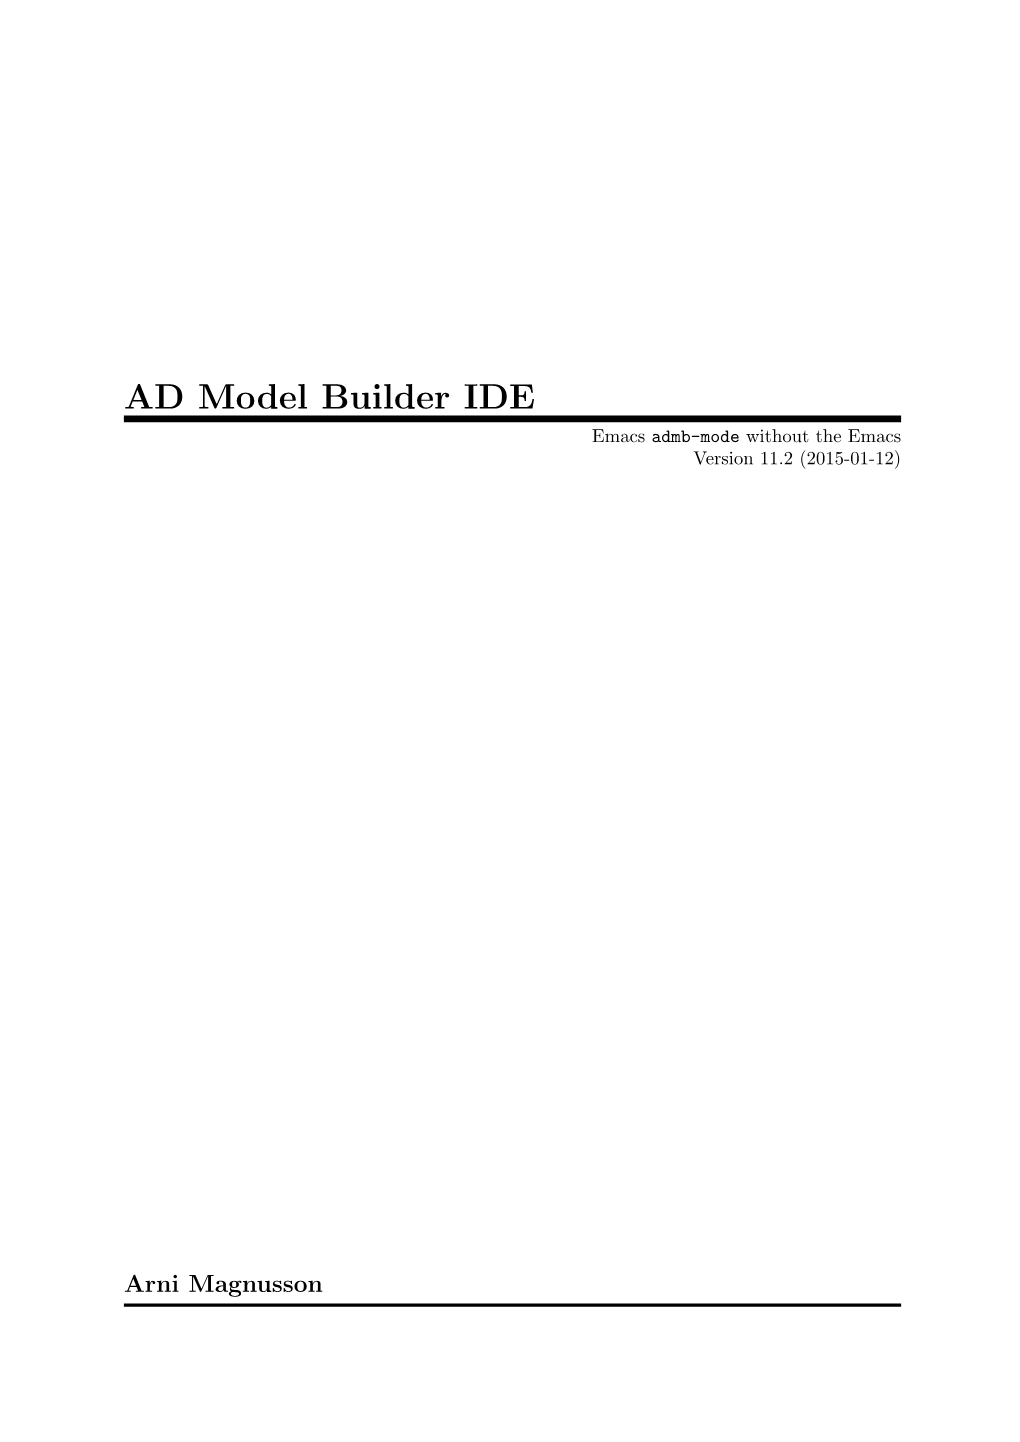 AD Model Builder IDE Emacs Admb-Mode Without the Emacs Version 11.2 (2015-01-12)